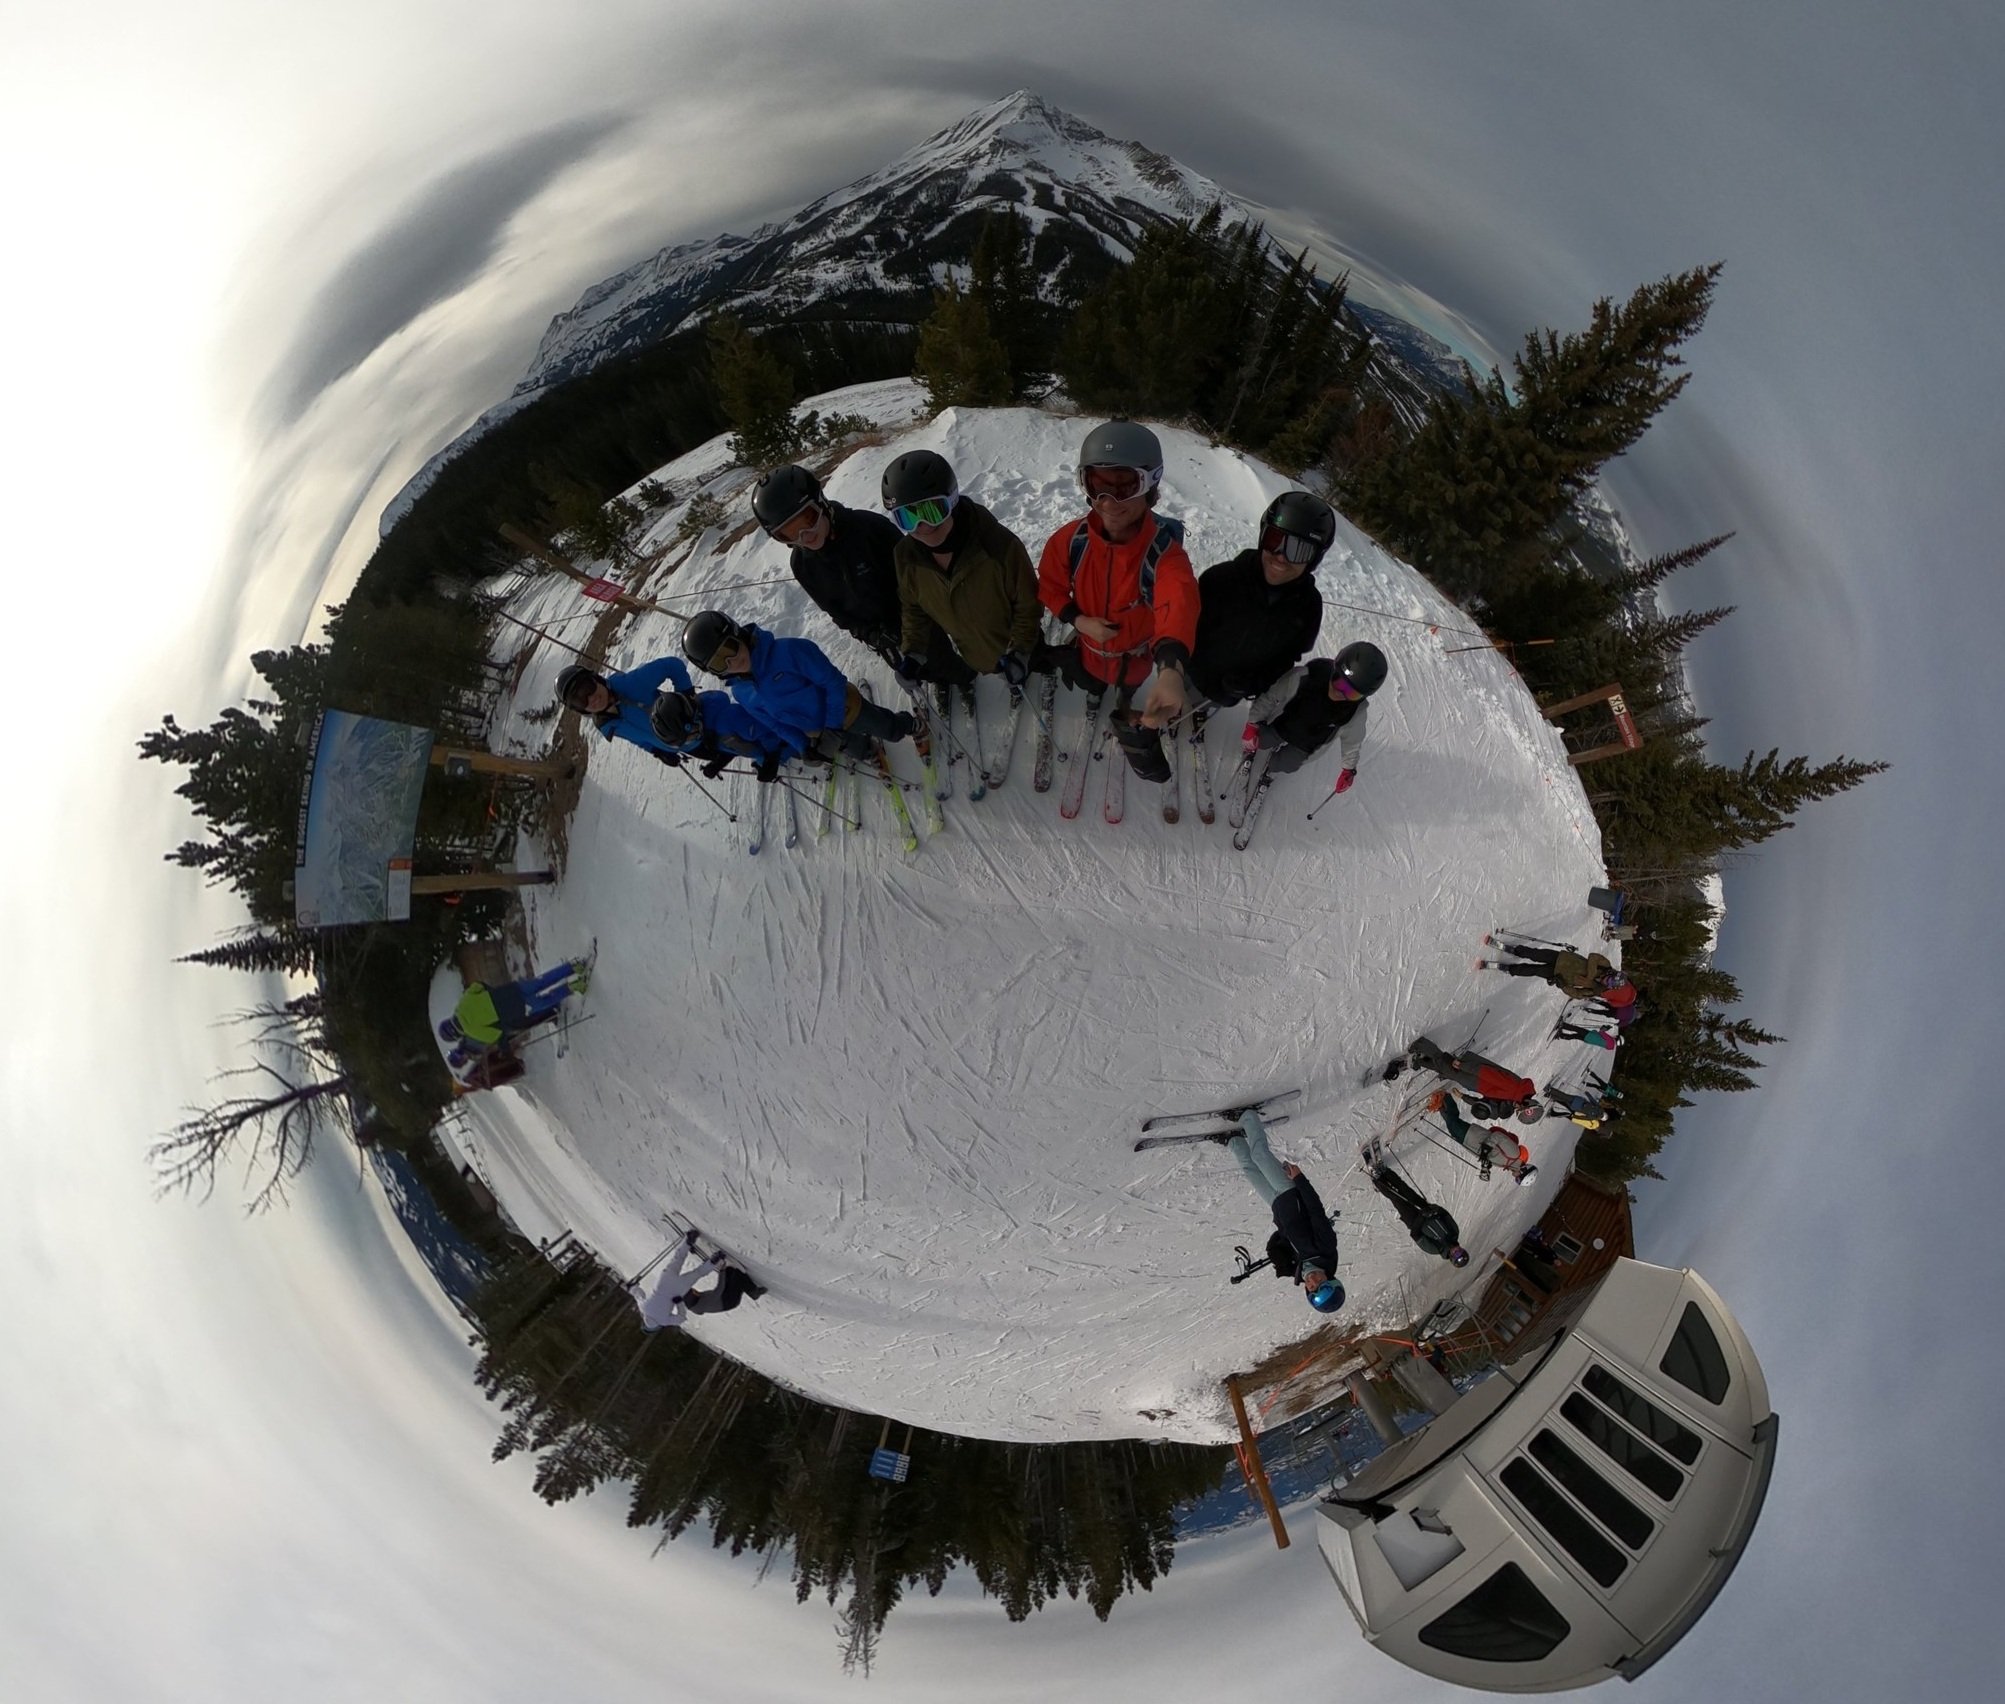 The Top of Andesite Mountain at Big Sky shot with a Gro Pro Max in 360 mode with 5k resolution. Edited in the GoPro Quik app with and IPad Pro